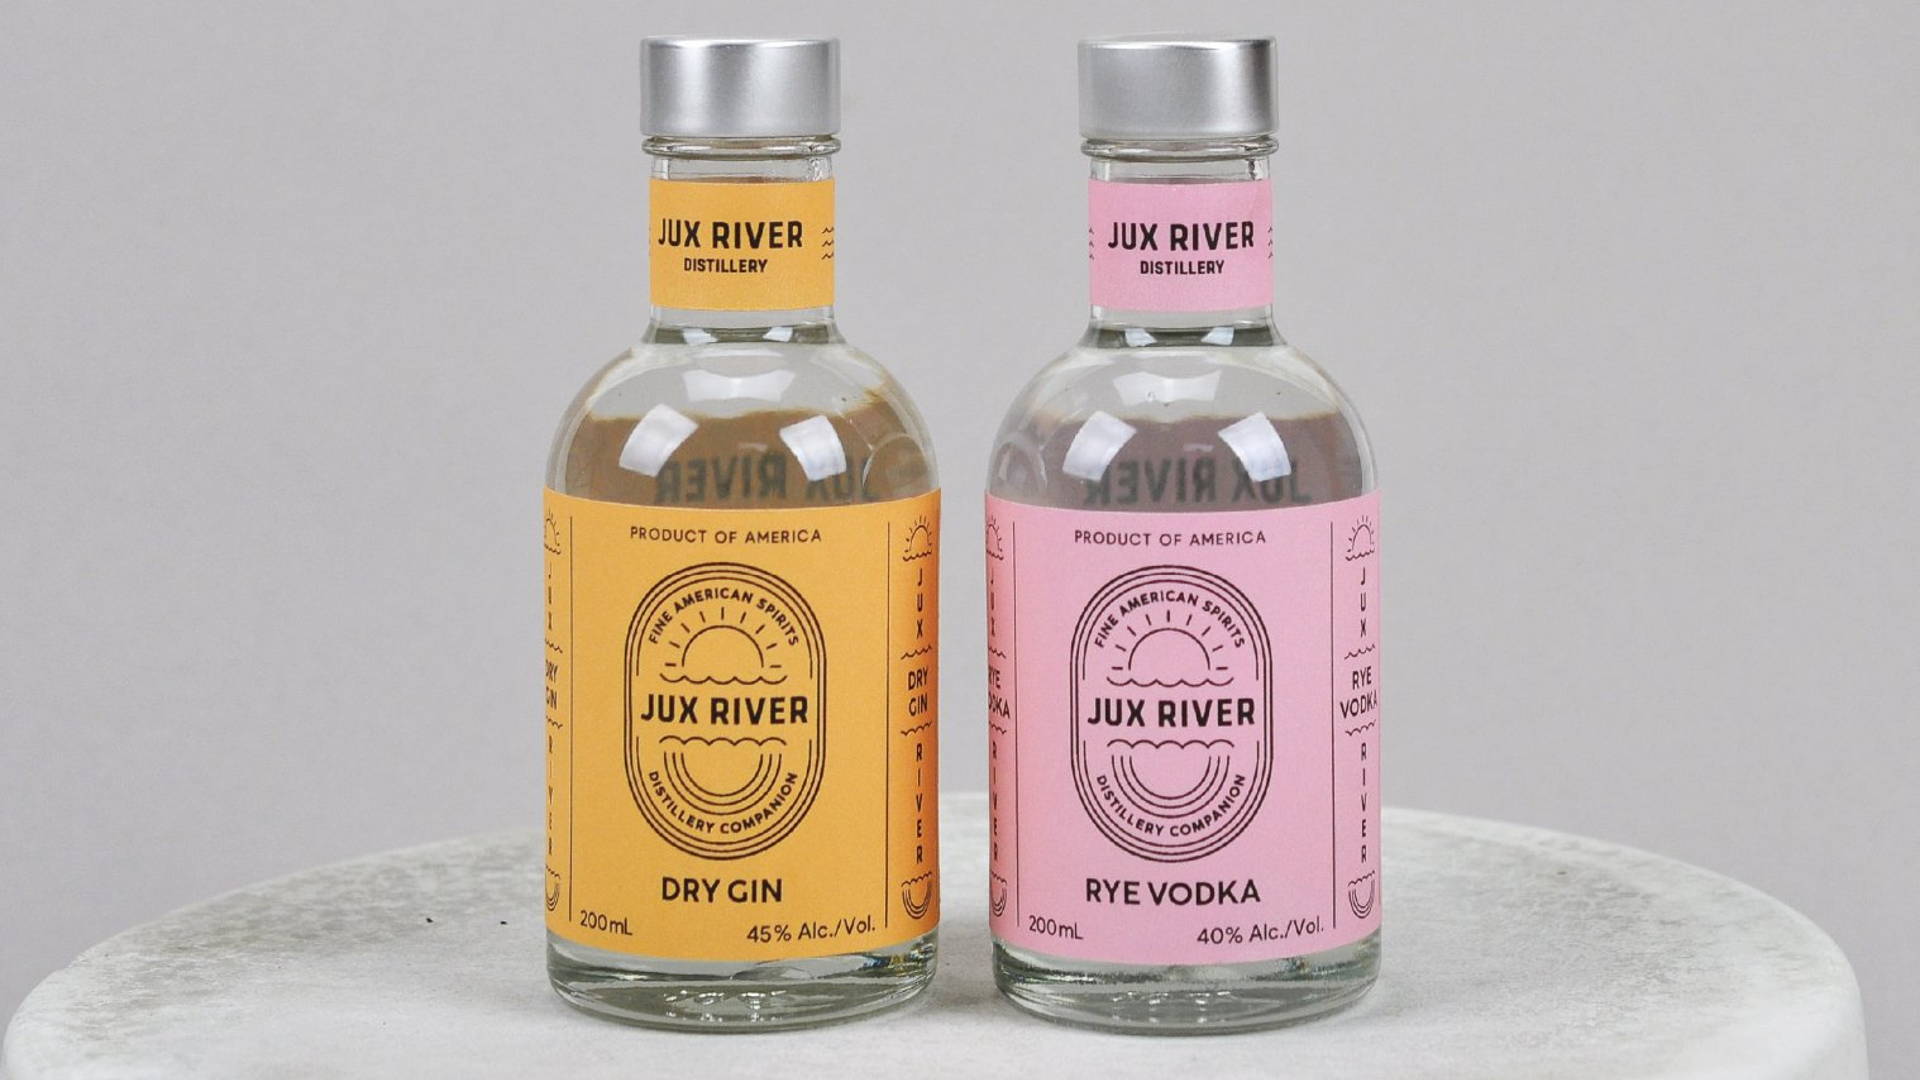 Featured image for Jux River Aims to Appeal to Millennials With Bright, Clean Labels